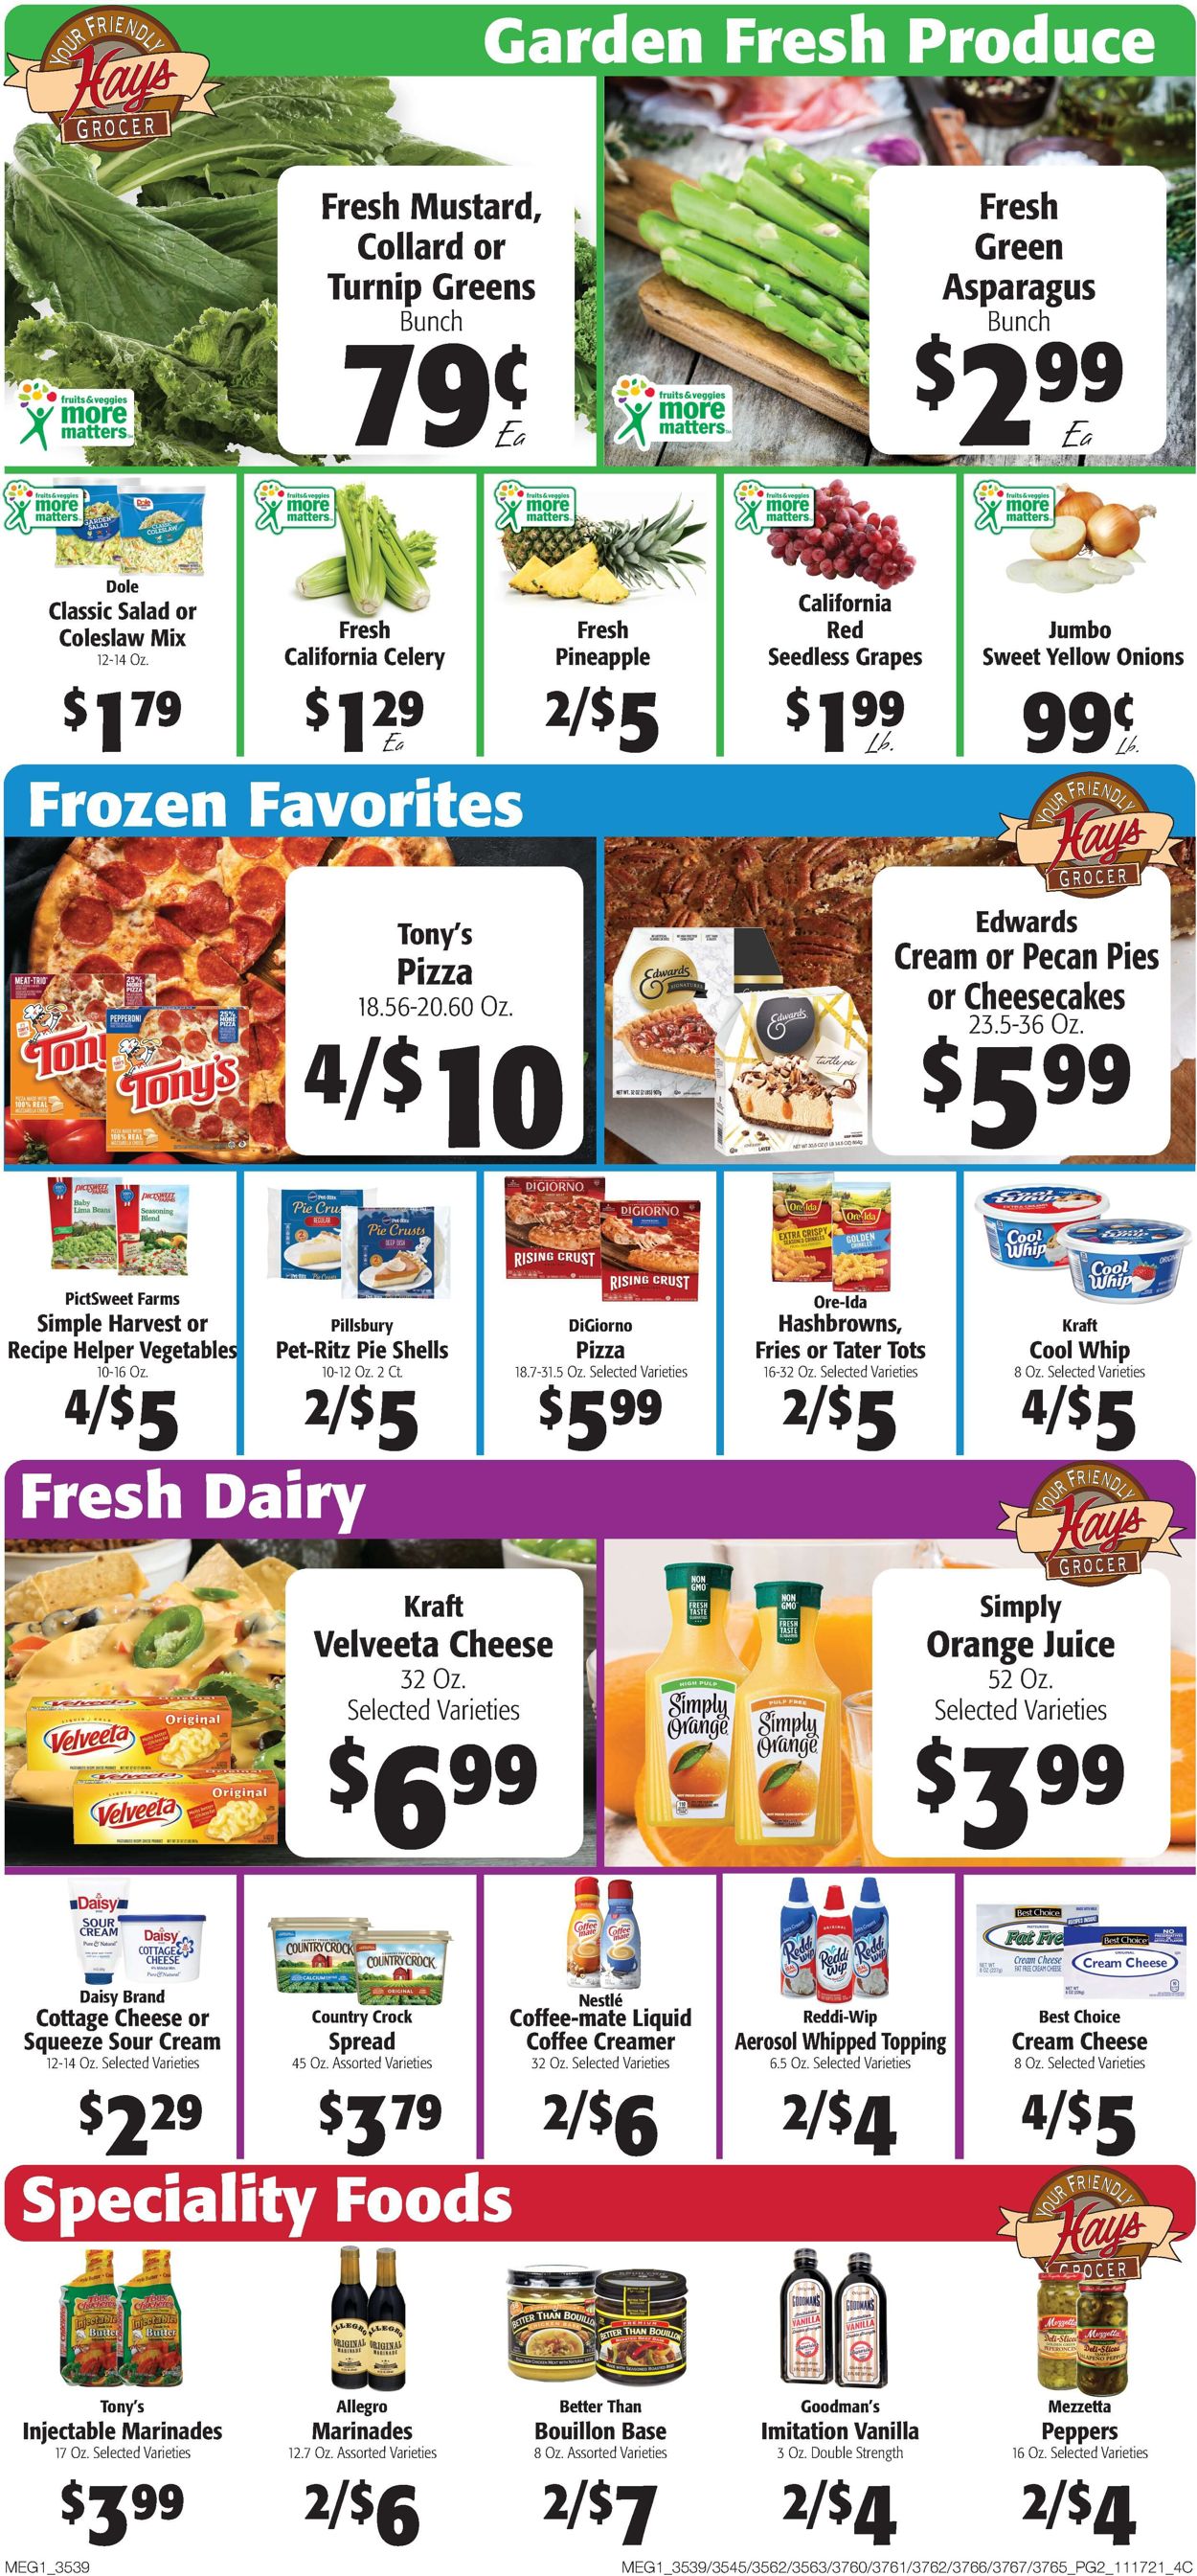 Hays Supermarket Ad from 11/17/2021